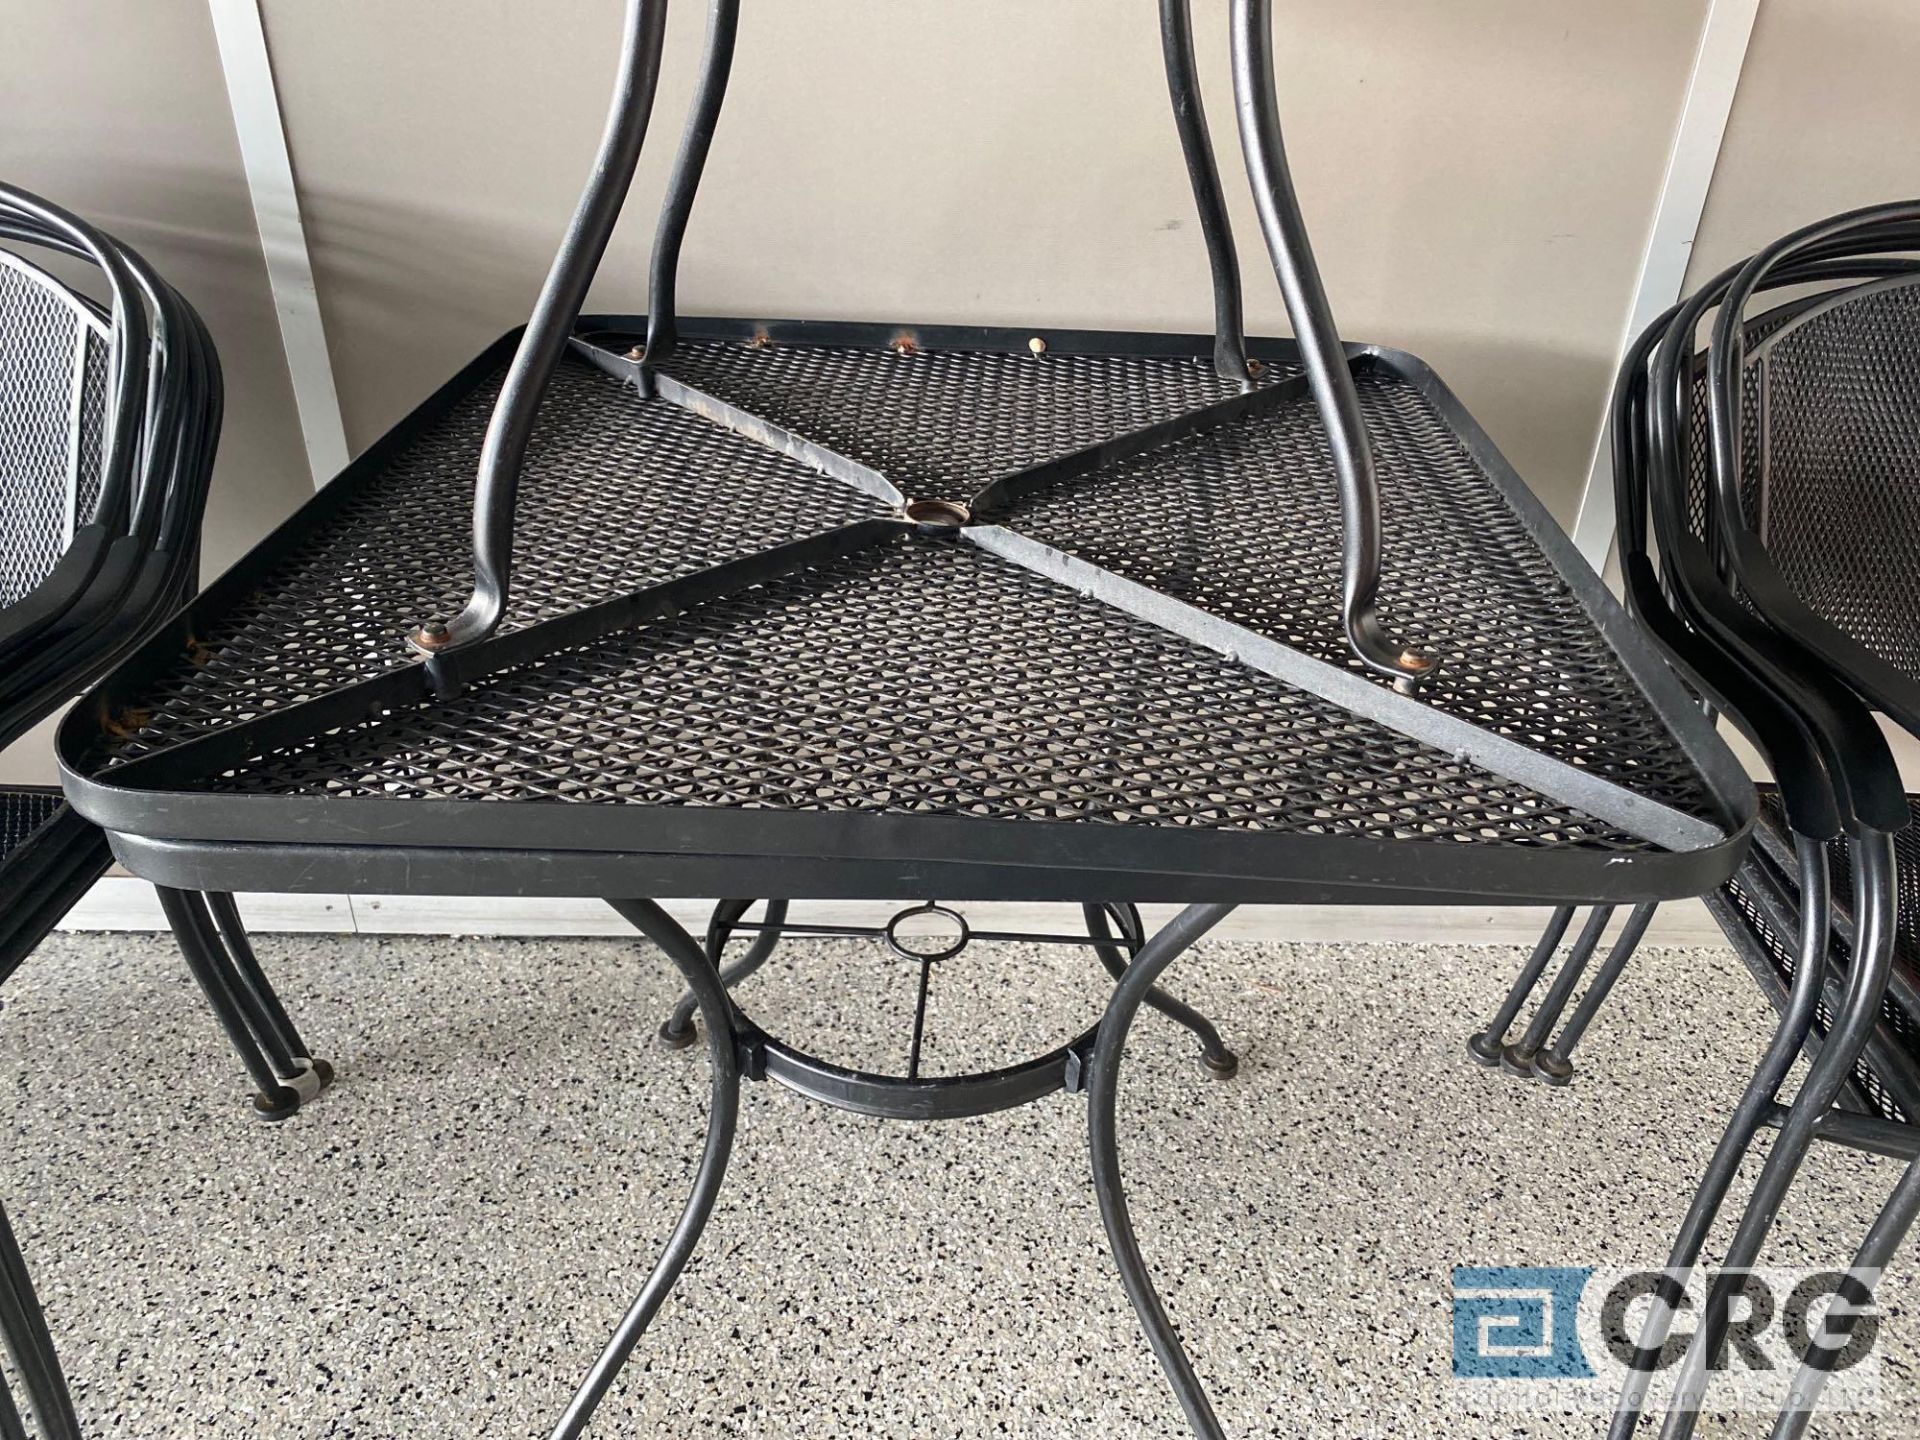 Metal Mesh Patio Tables - Image 3 of 5